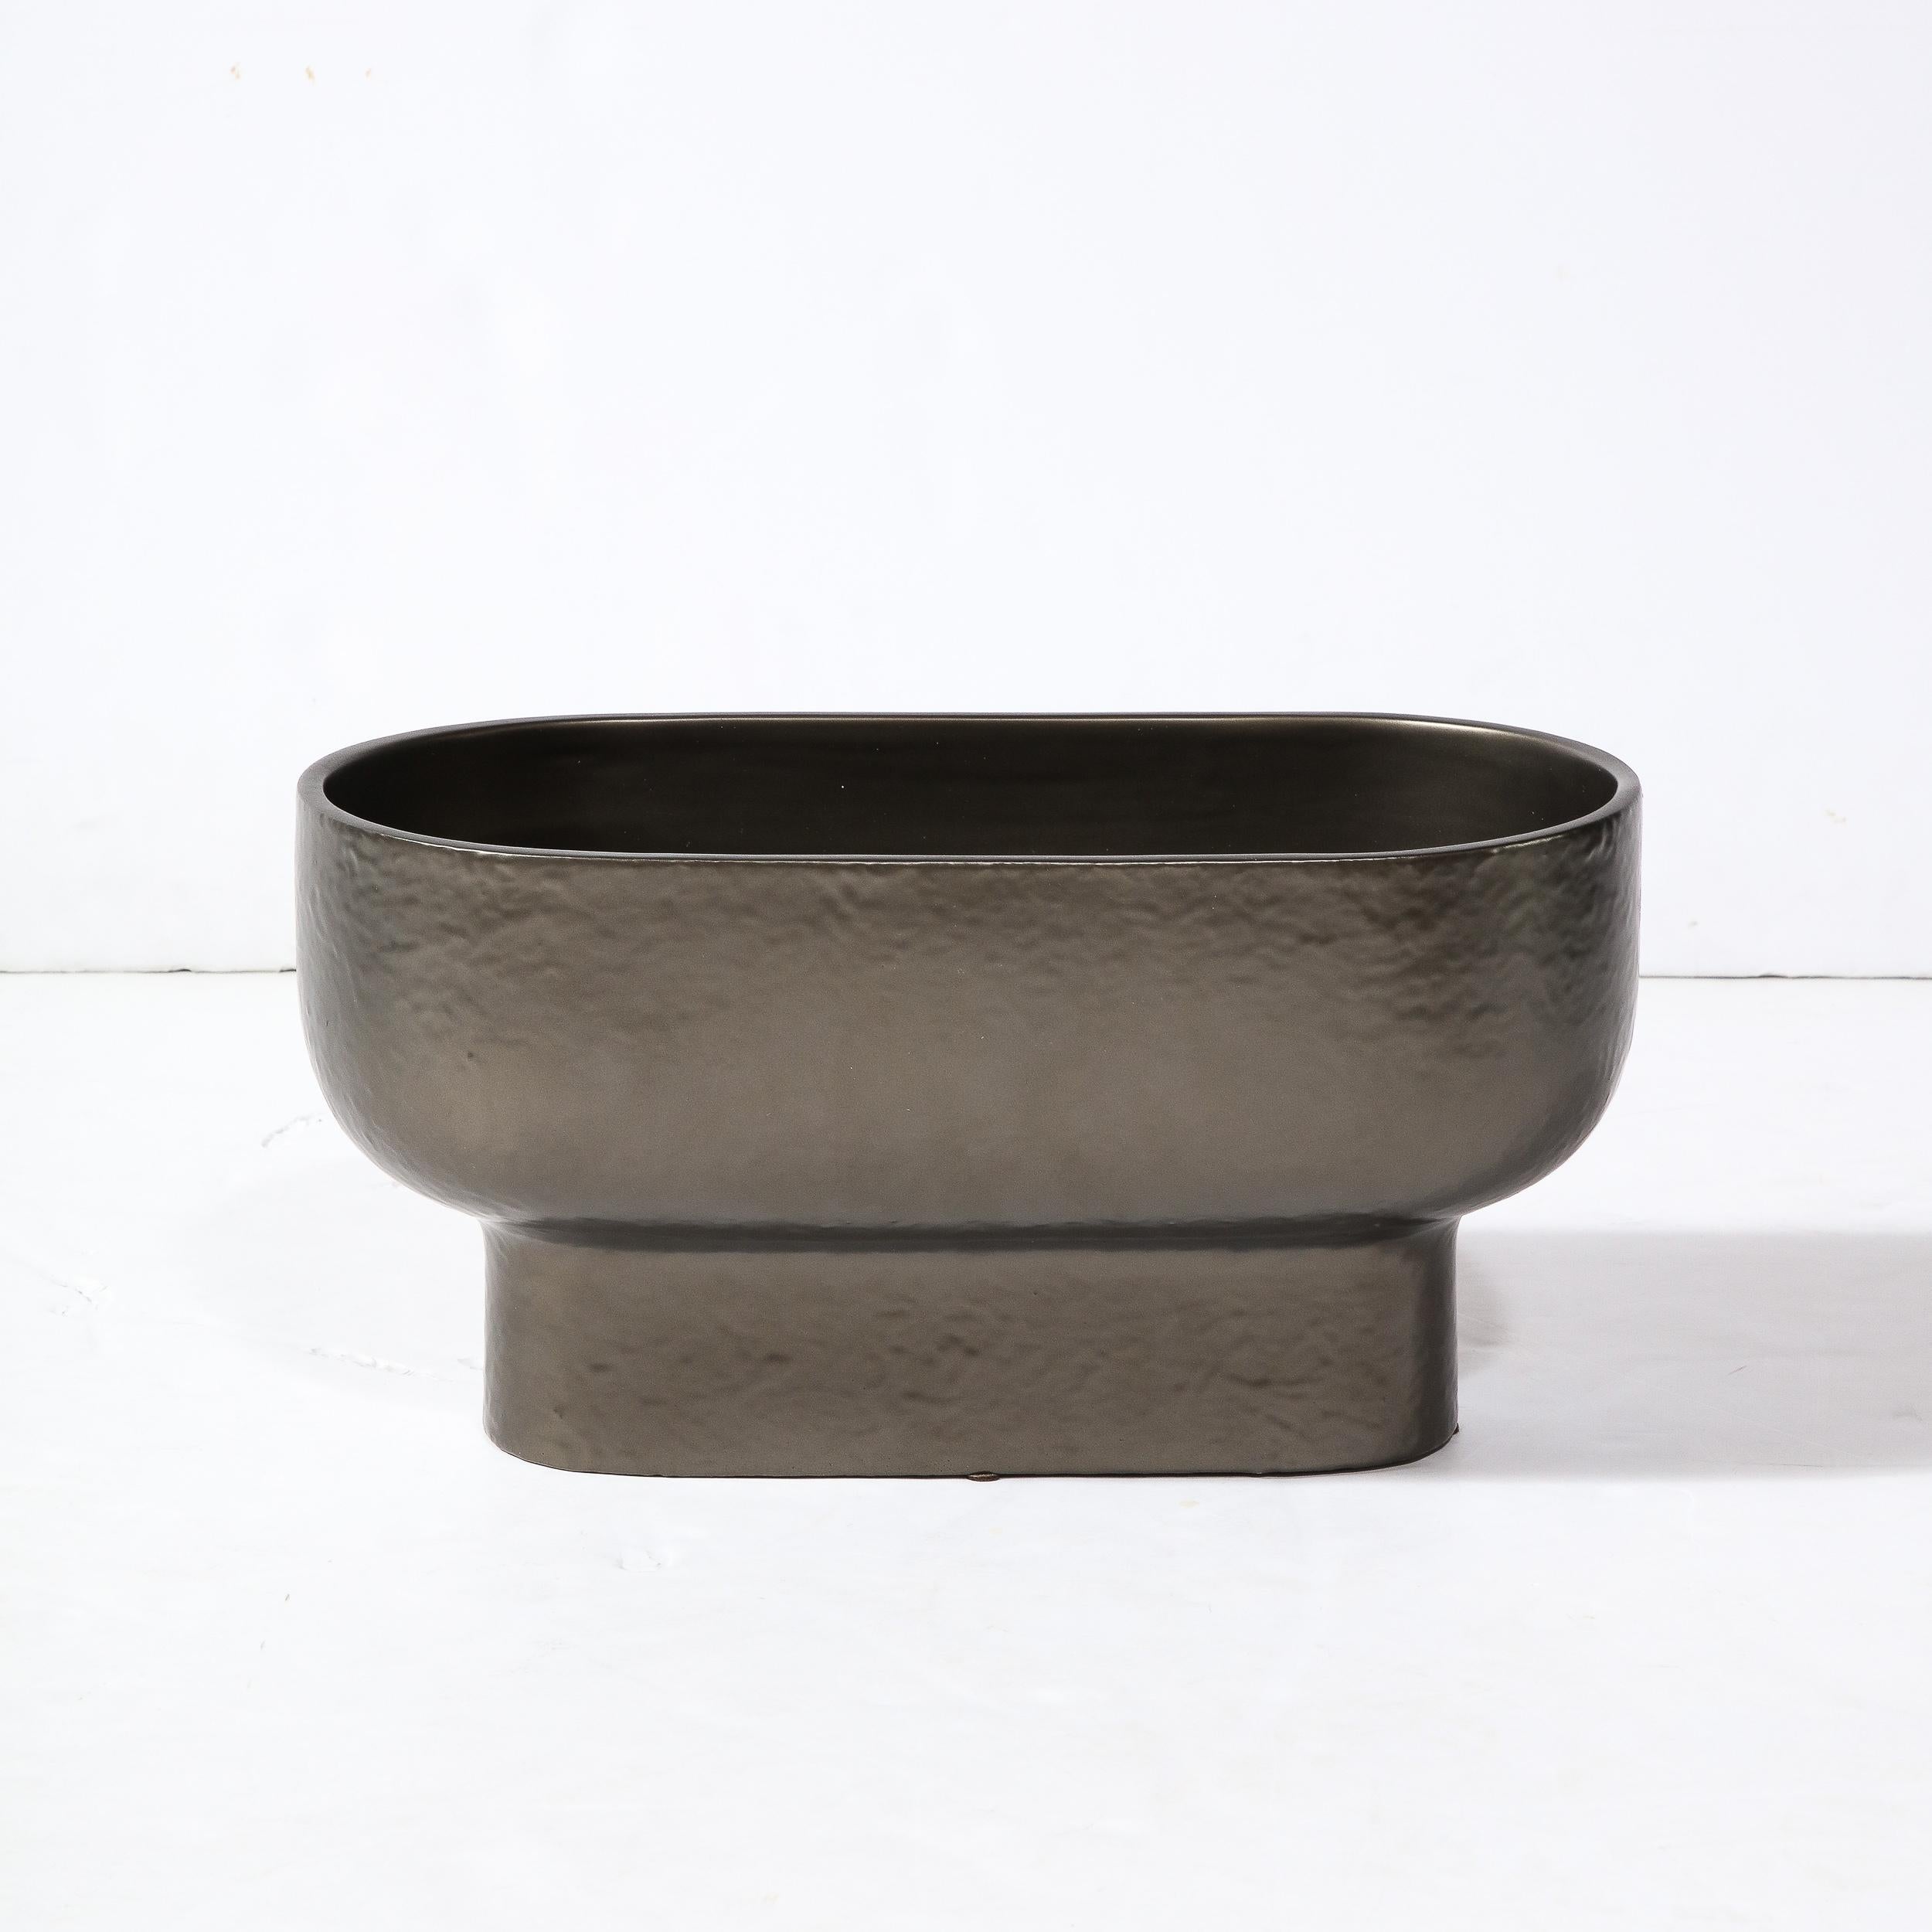 This sophisticated modernist orchid vase/ occasional bowl was realized in the United States during the latter half of hte 20th century. Realized in ceramic and finished with a bronze hued glaze (offering a subtle metallic sheen and texture), this